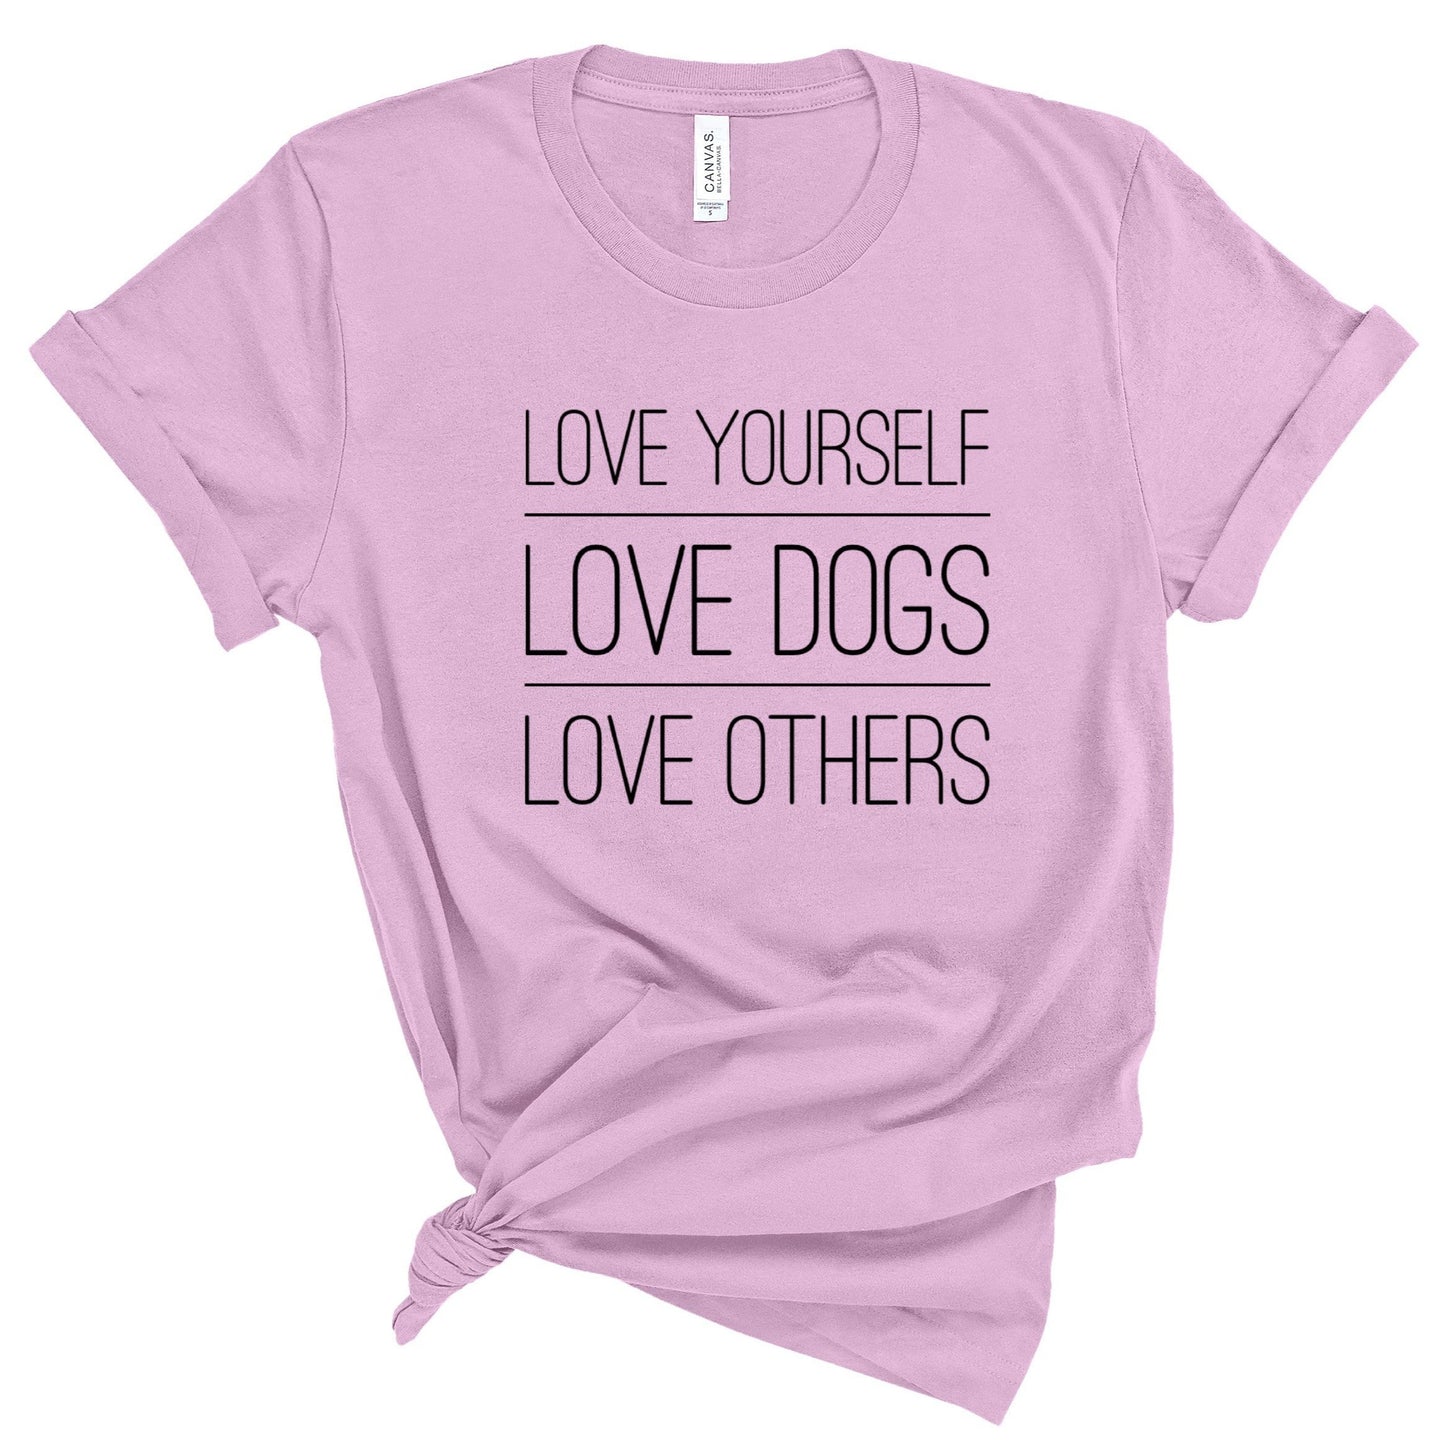 Love Yourself, Dogs, and Others